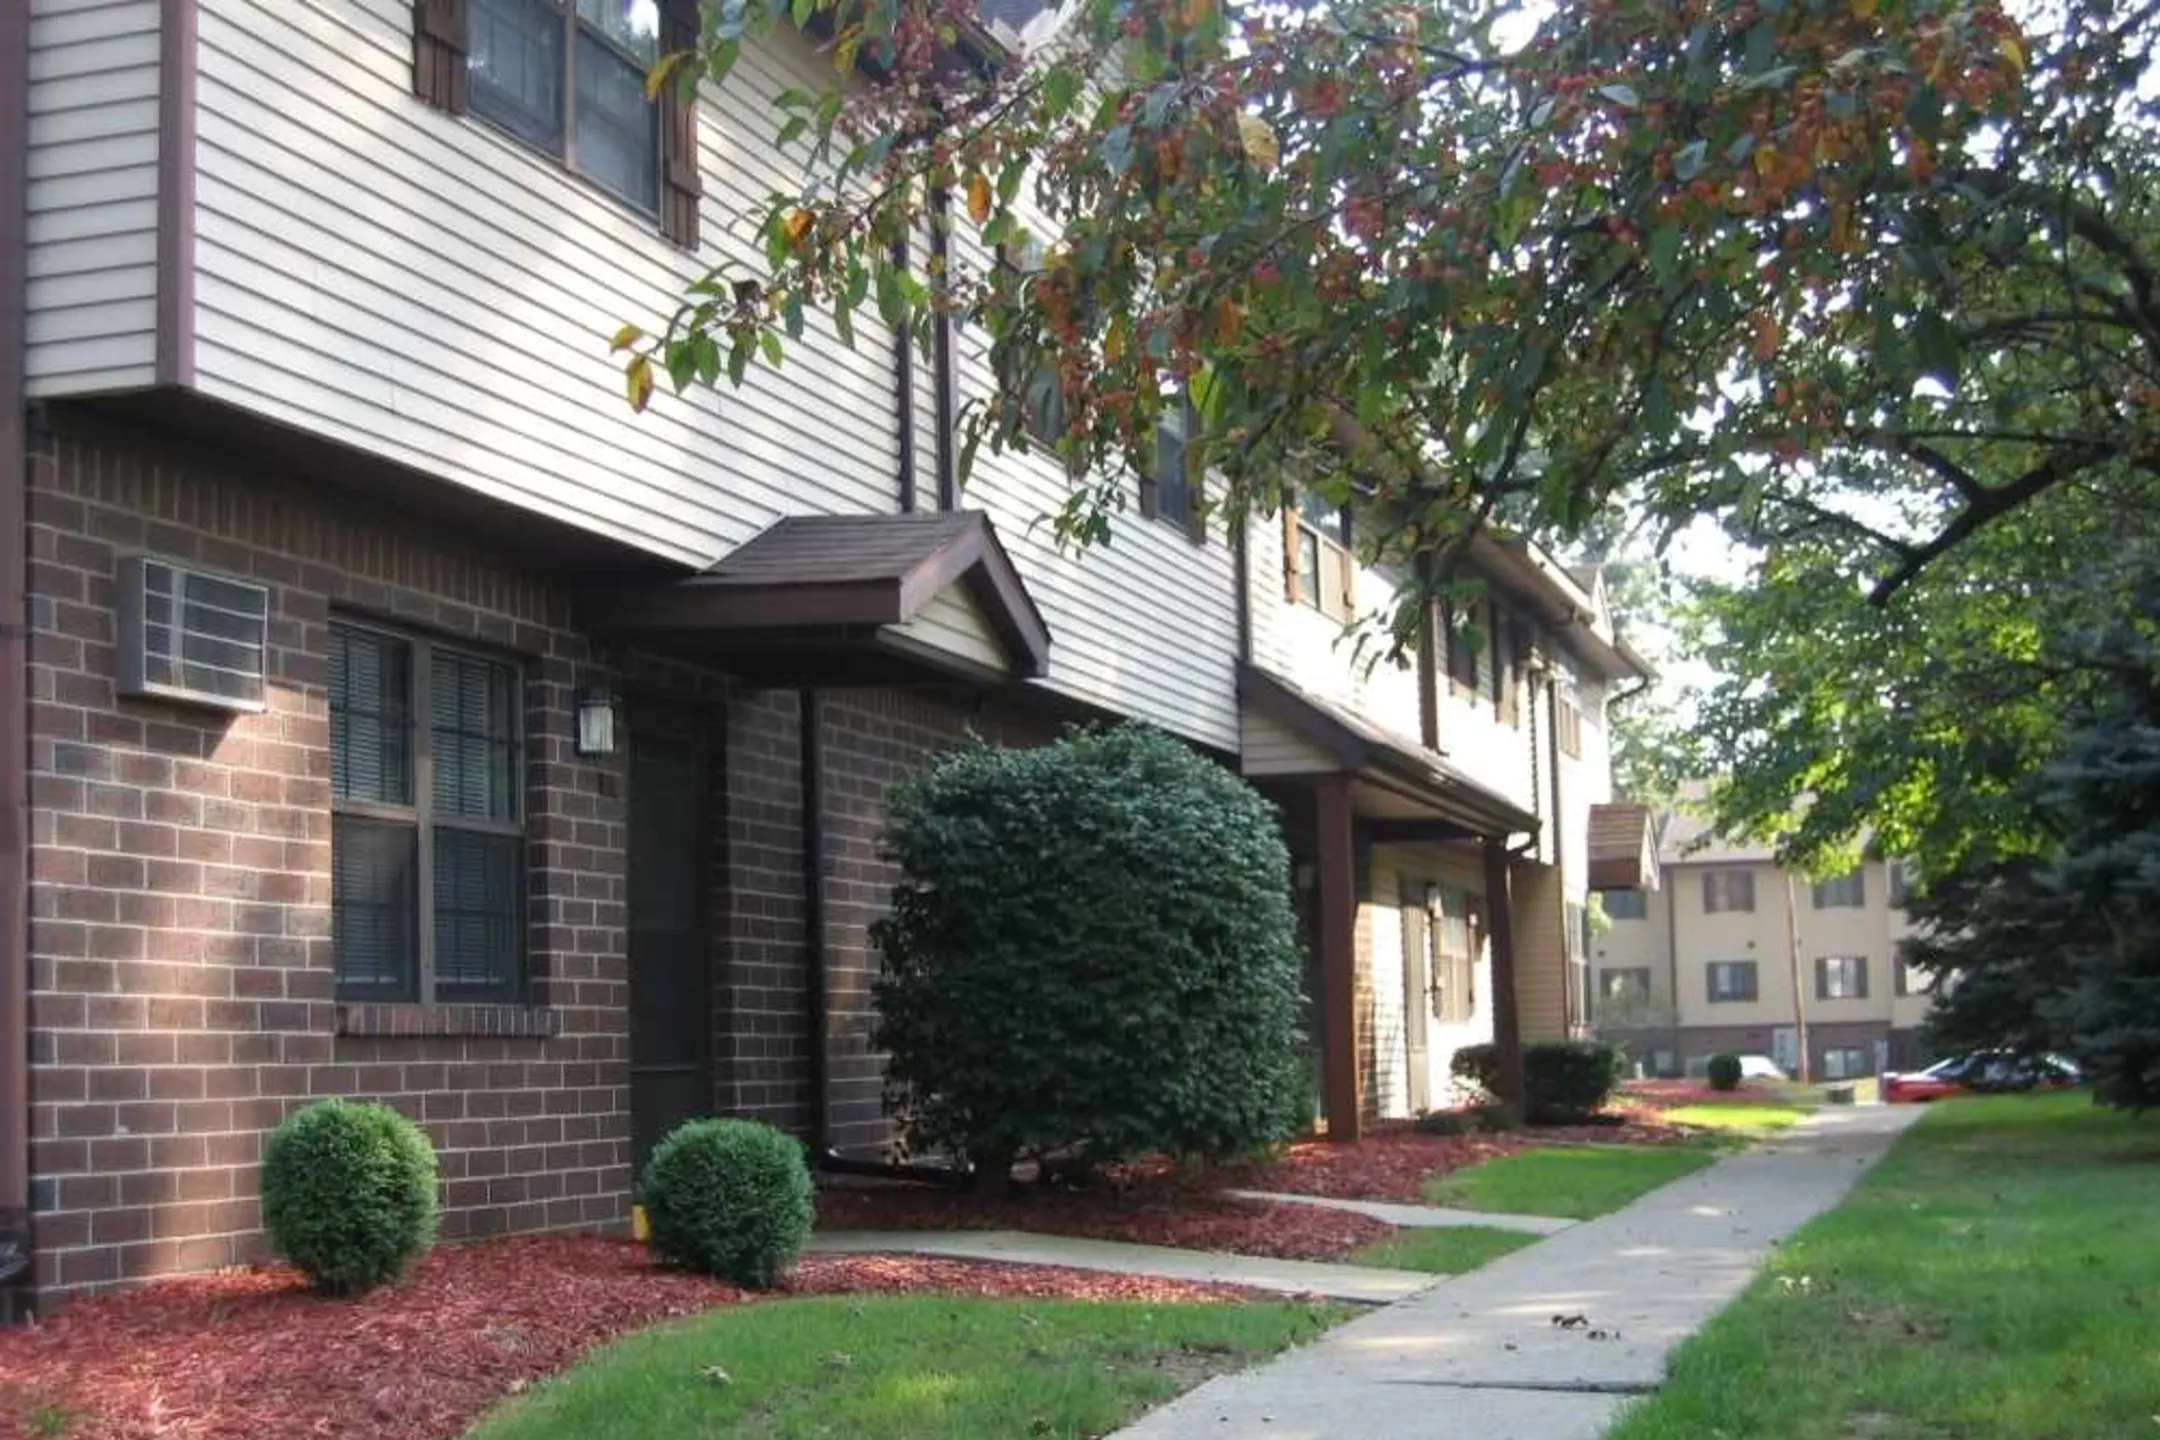 Building - Wood Ridge Apartments And Townhomes - Toledo, OH